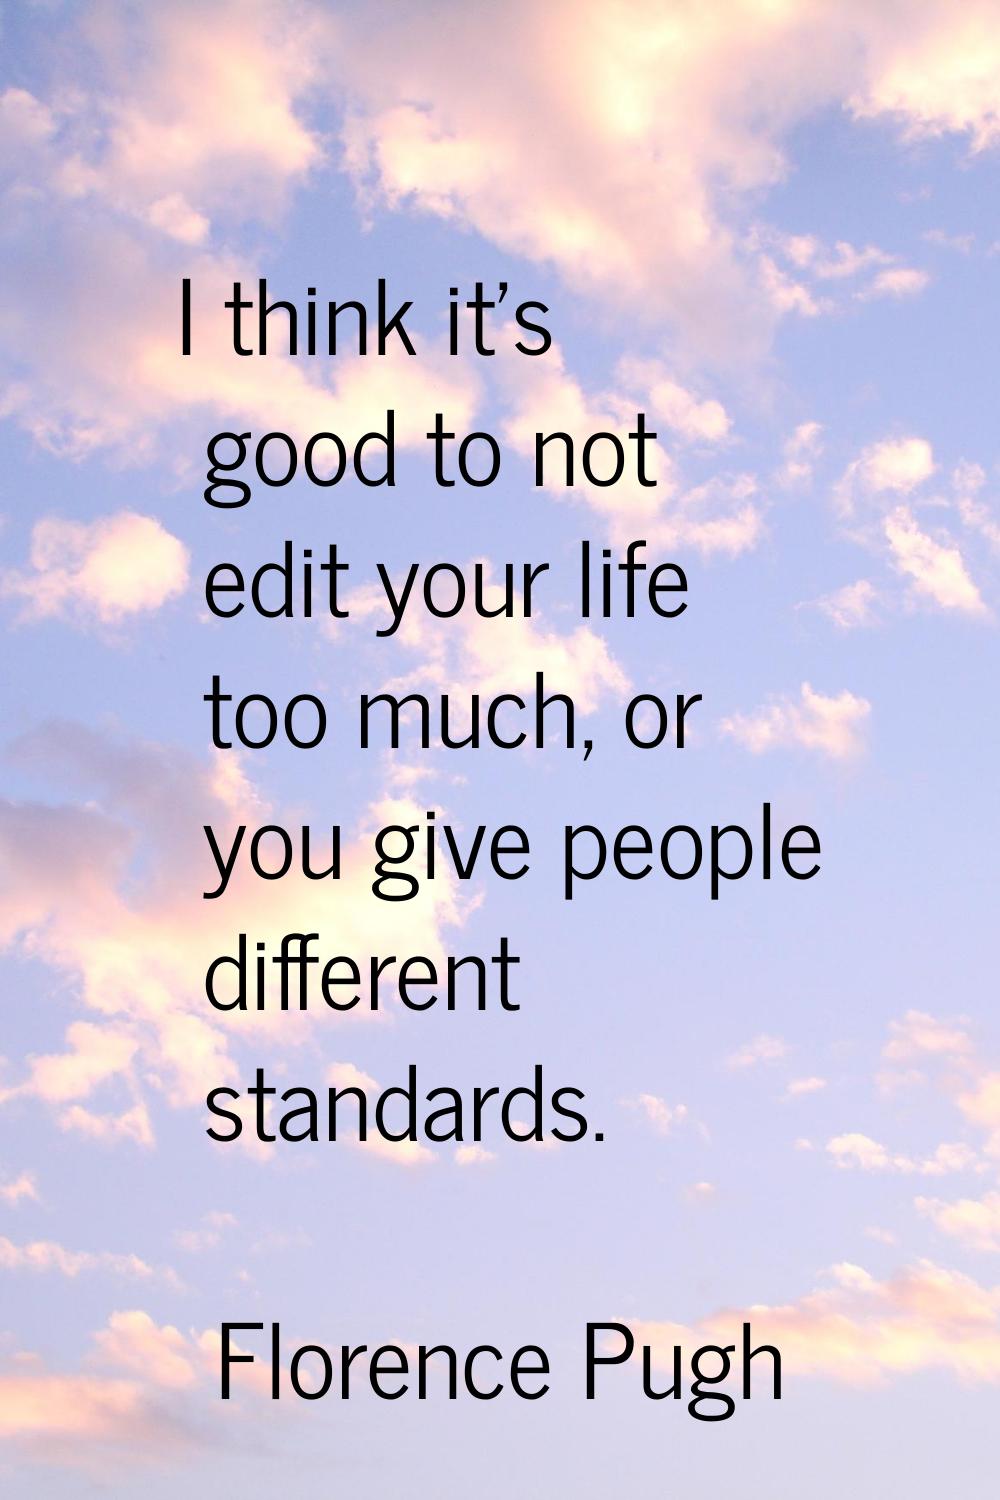 I think it's good to not edit your life too much, or you give people different standards.